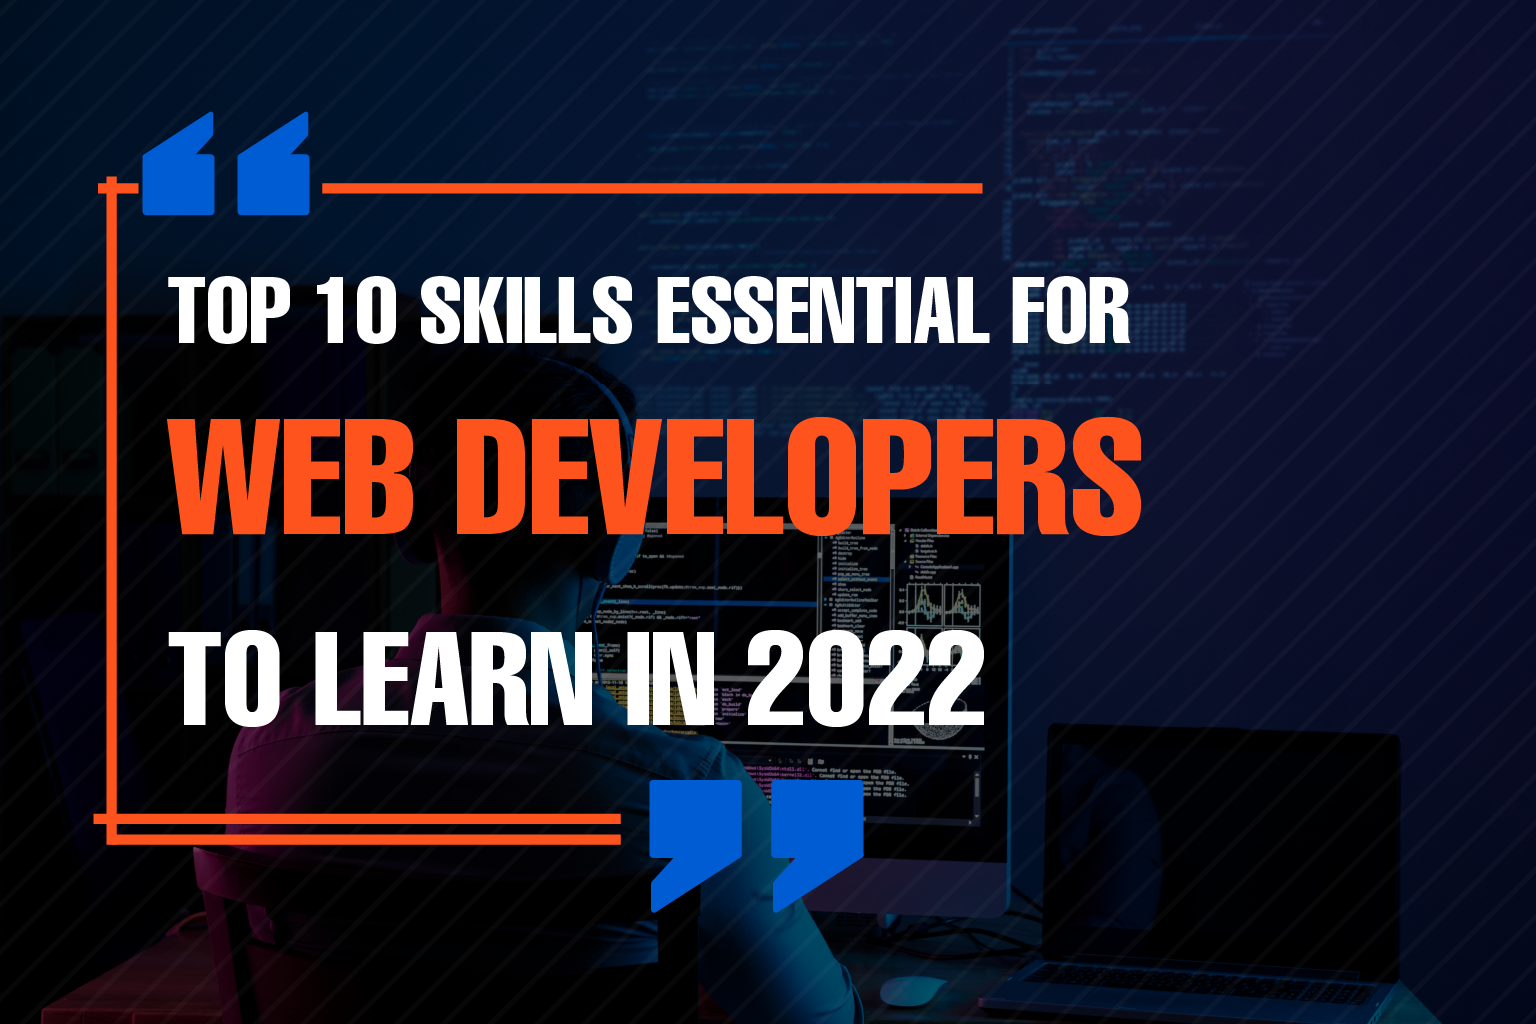 Top 10 Skills Essential for Web Developers to Learn in 2022